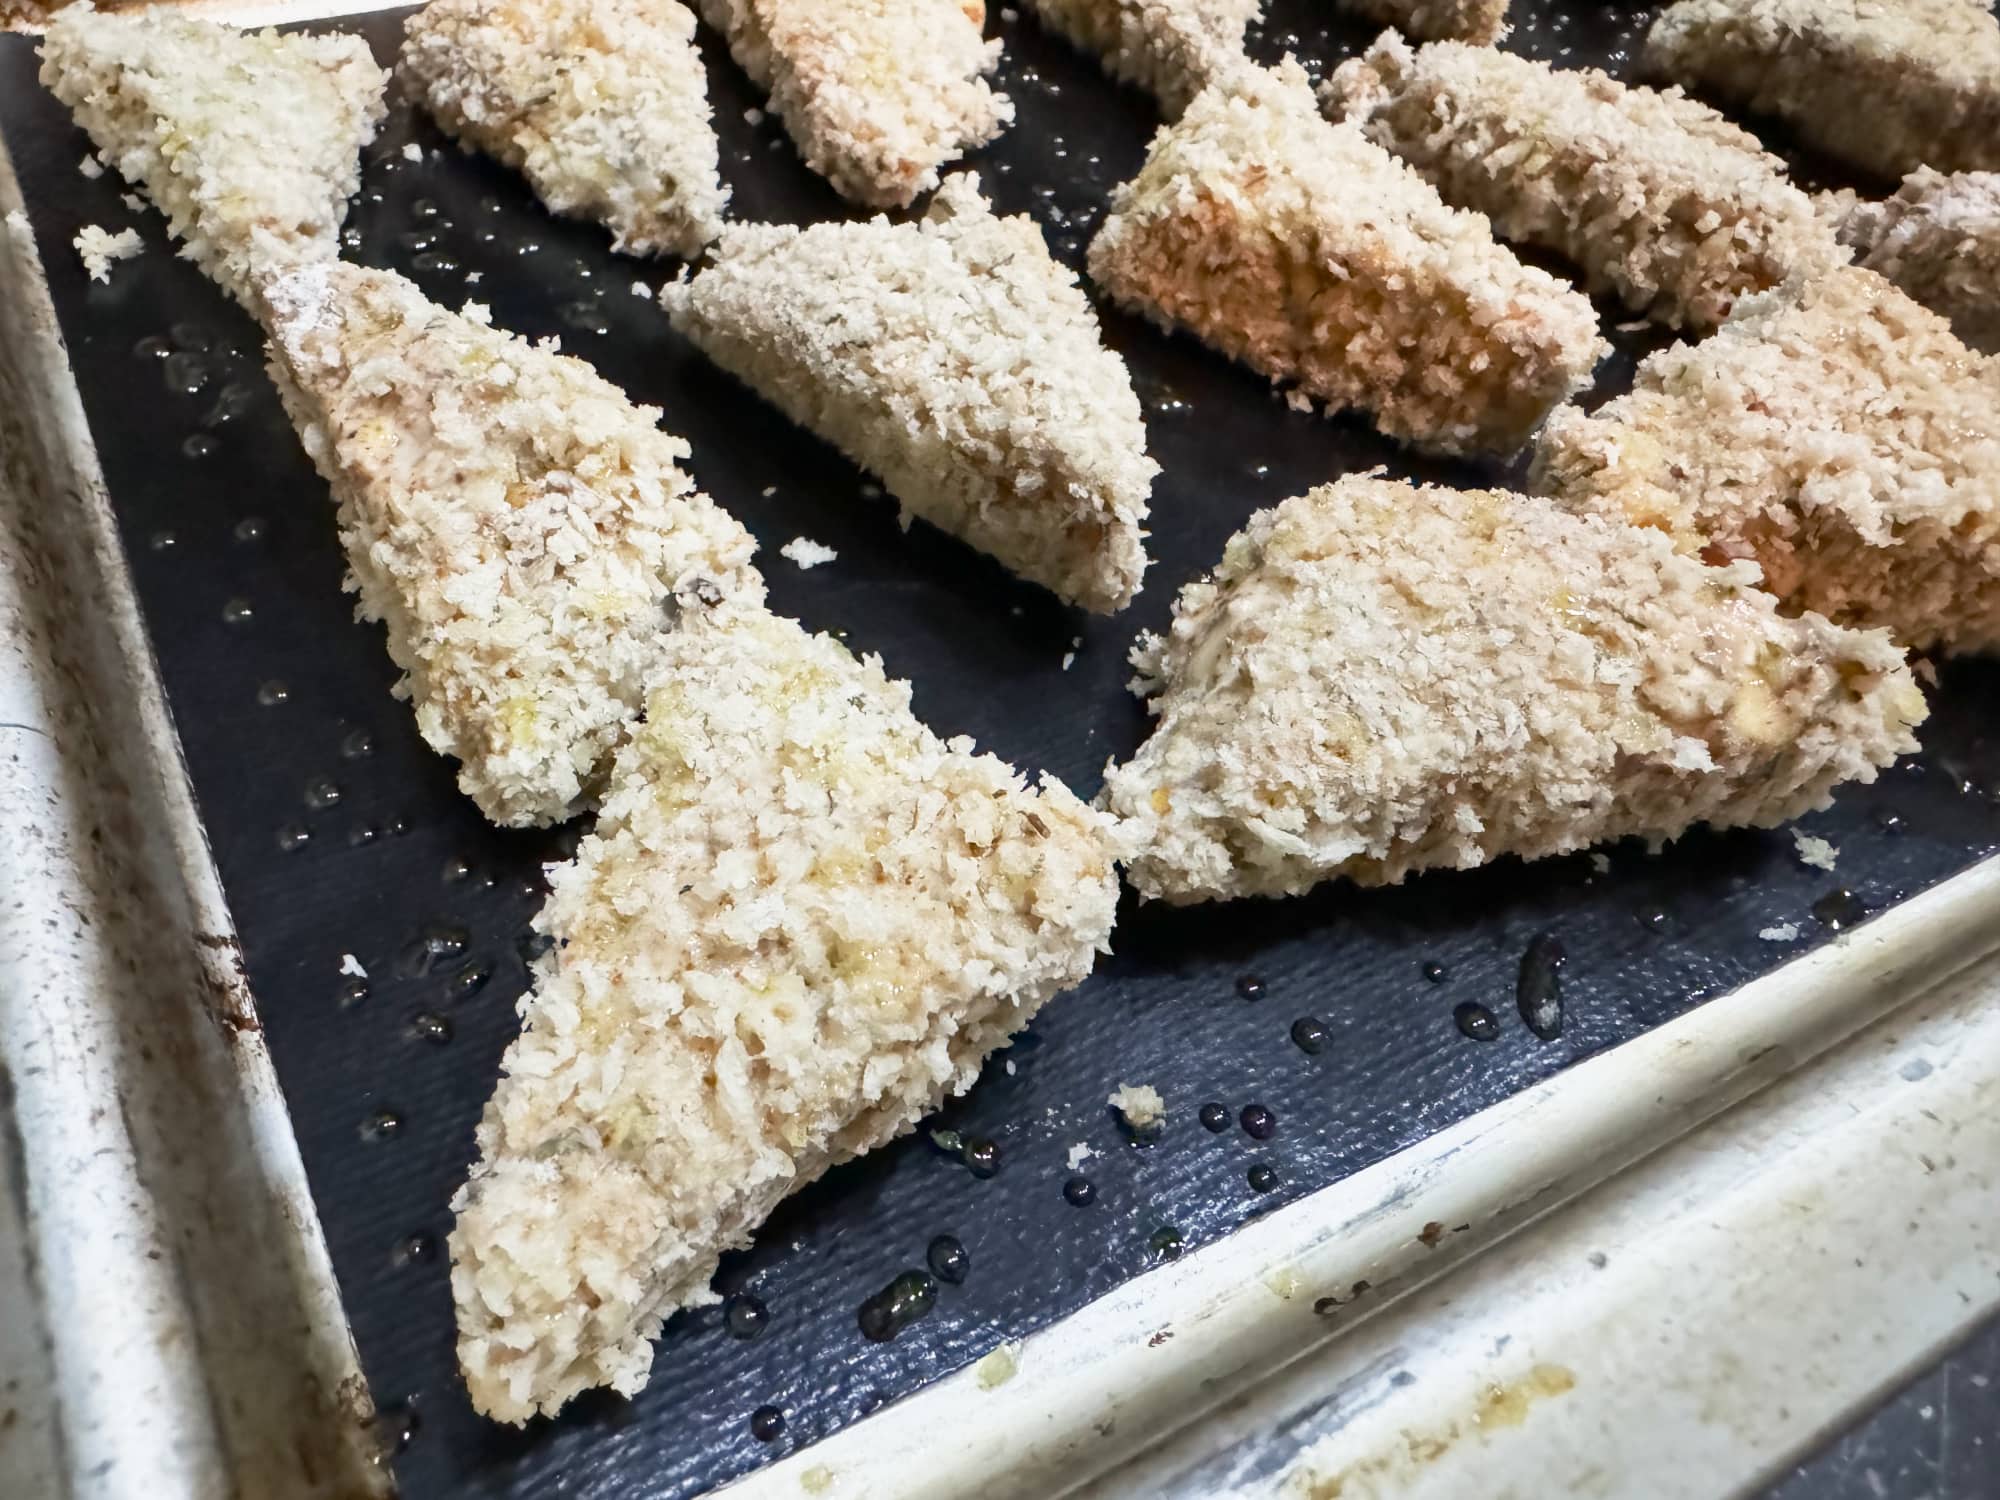 buffalo tempeh pieces coated in seasonings and panko and on a baking sheet ready to be baked.